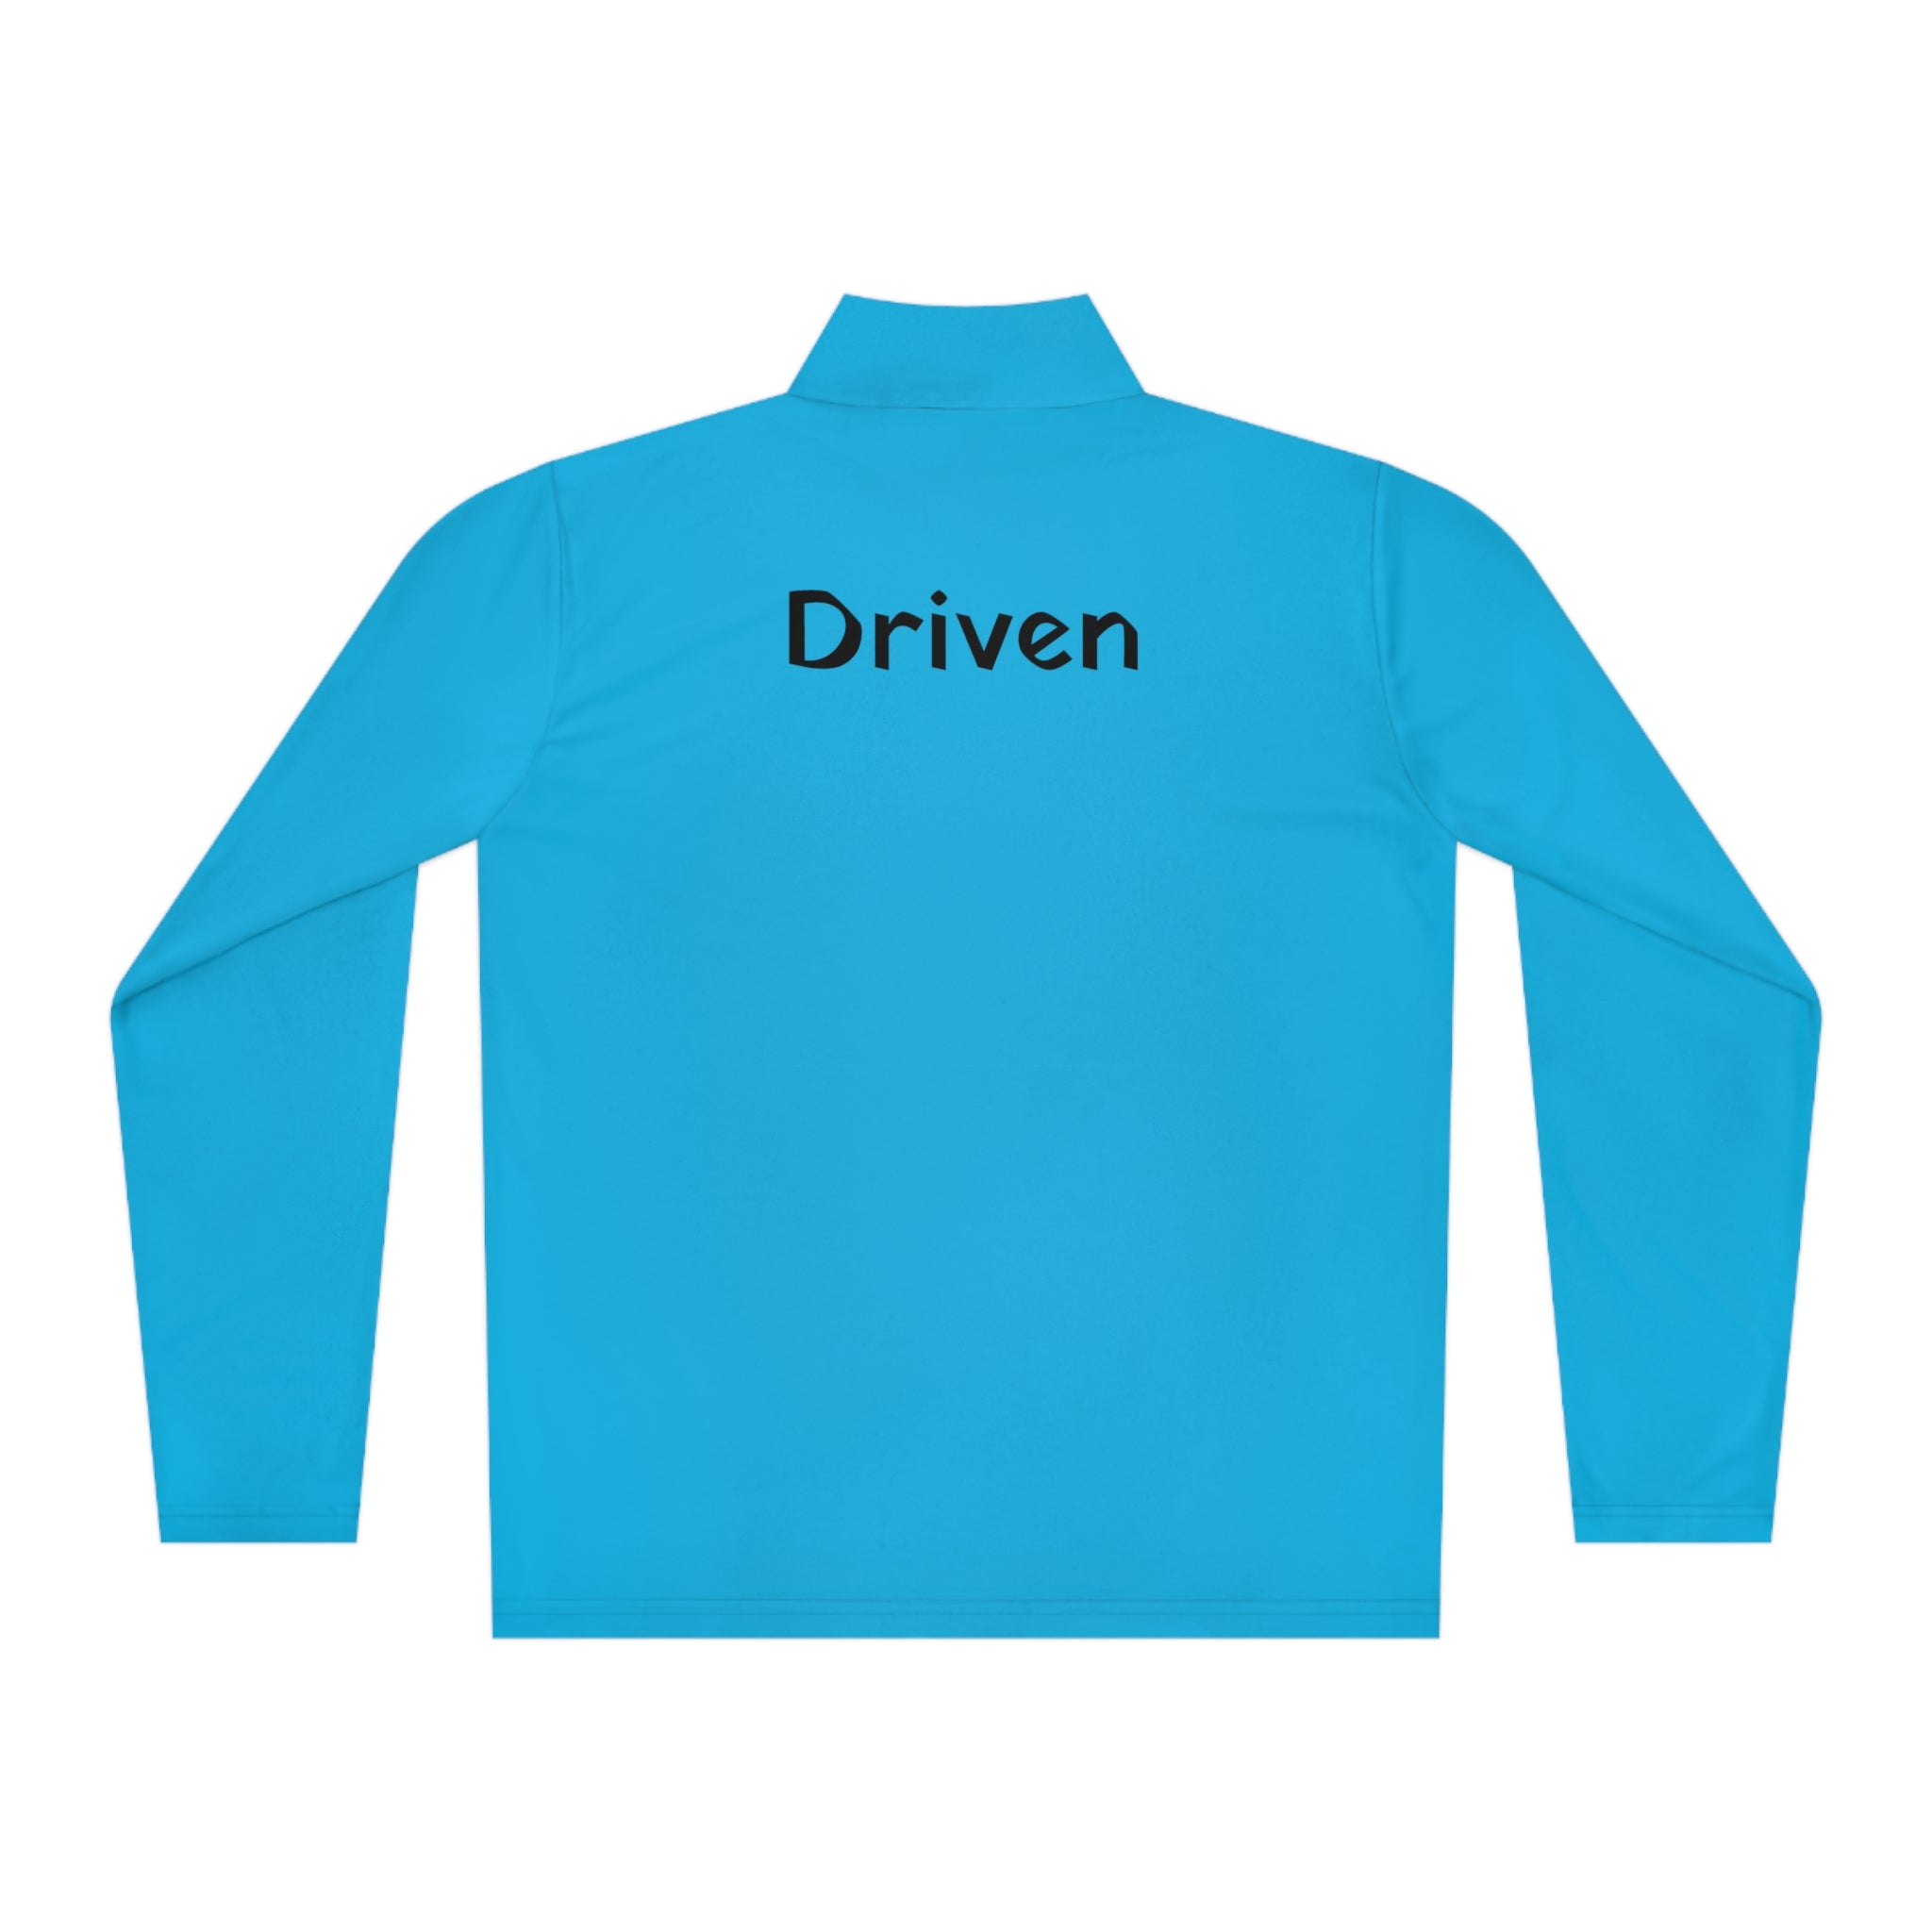 Driven Q-Zip Pullover: Promote Mental Health Atomic Blue Casual Pullover Cozy Pullover Crewneck Pullover Fashion Pullover Graphic Pullover Knit Pullover Layering Piece Lightweight Pullover Men's Pullover Pullover Pullover Collection Pullover Sweater Stylish Pullover Trendy Pullover Women's Pullover Long-sleeve 9013284300158790243_2048 Printify